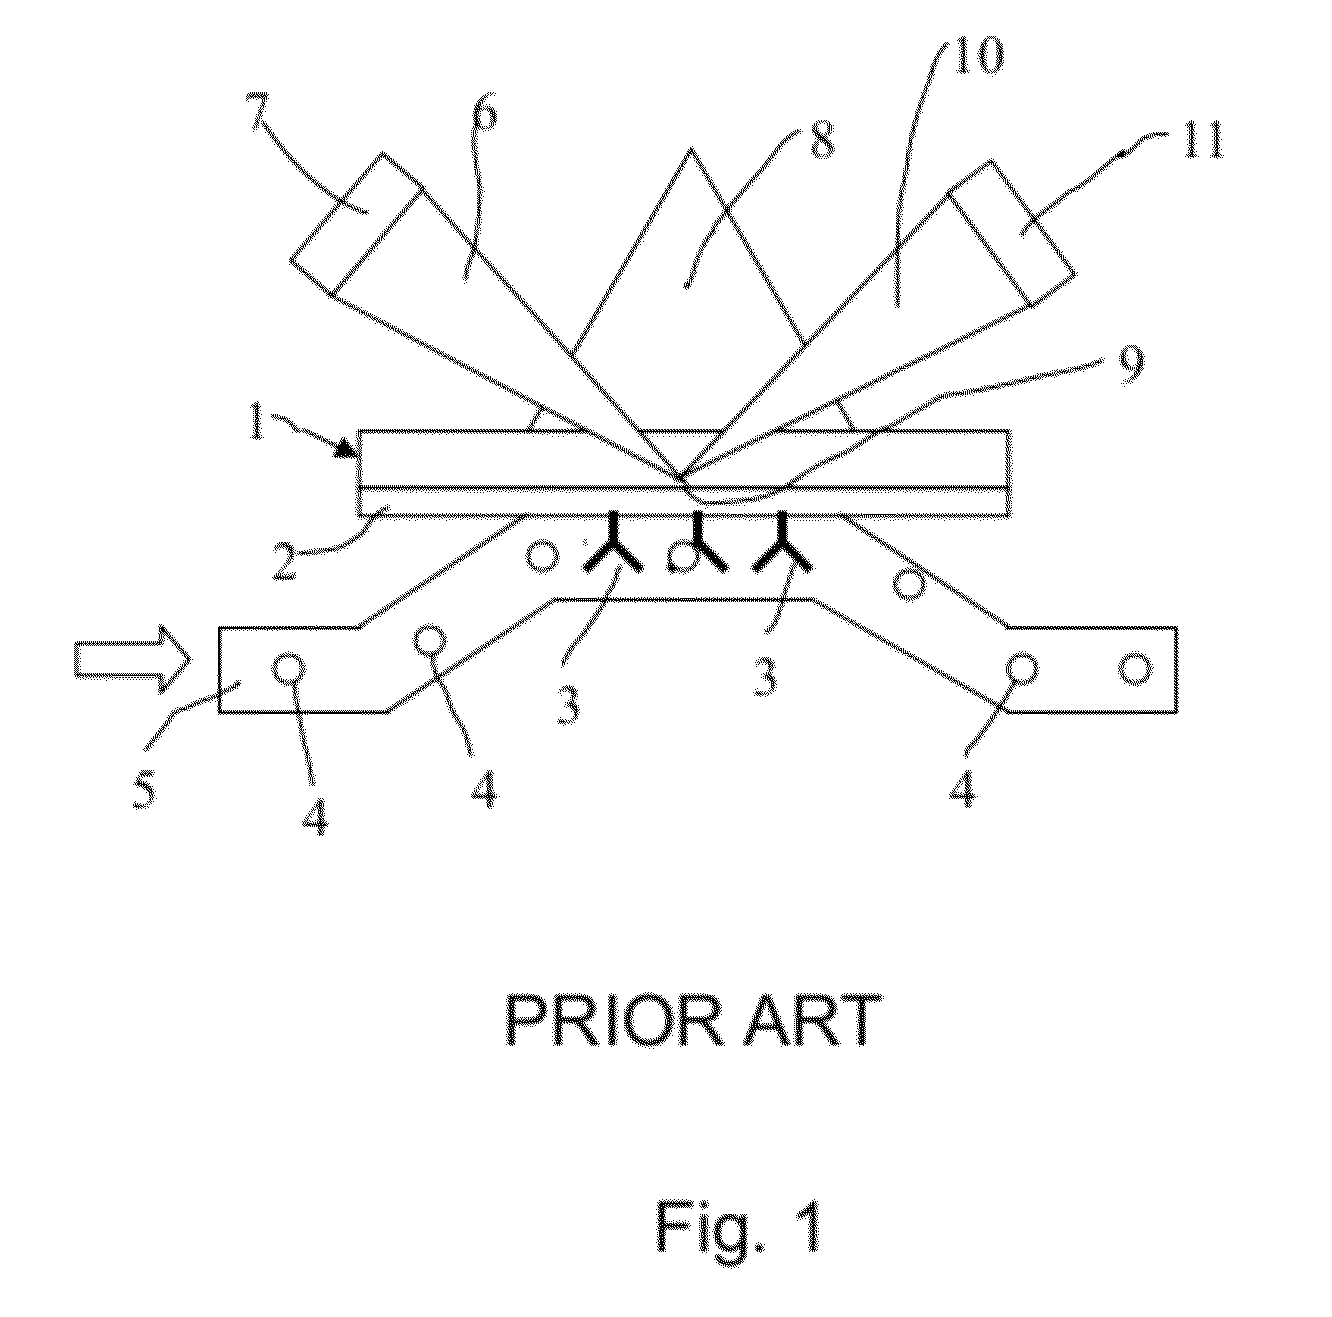 Method and system for interaction analysis